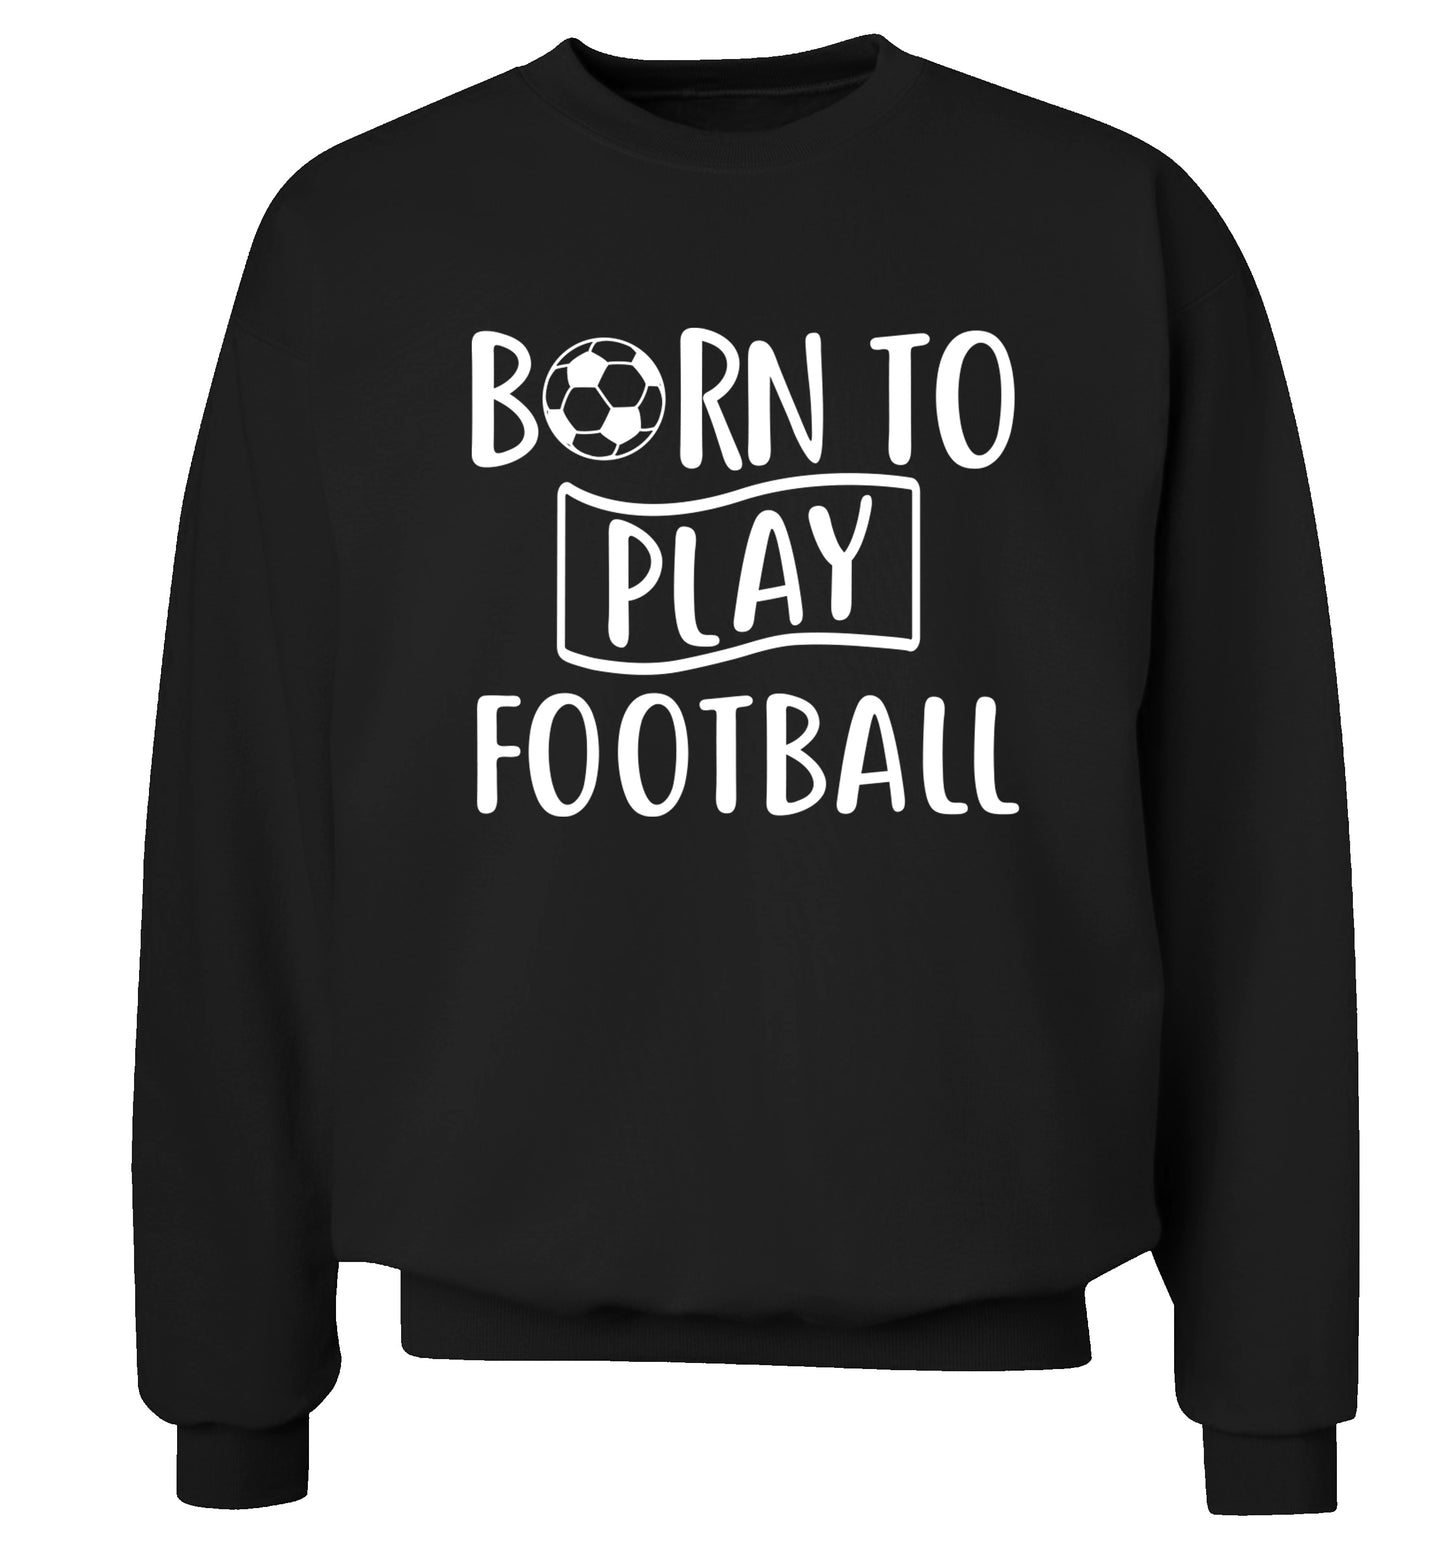 Born to play football Adult's unisexblack Sweater 2XL